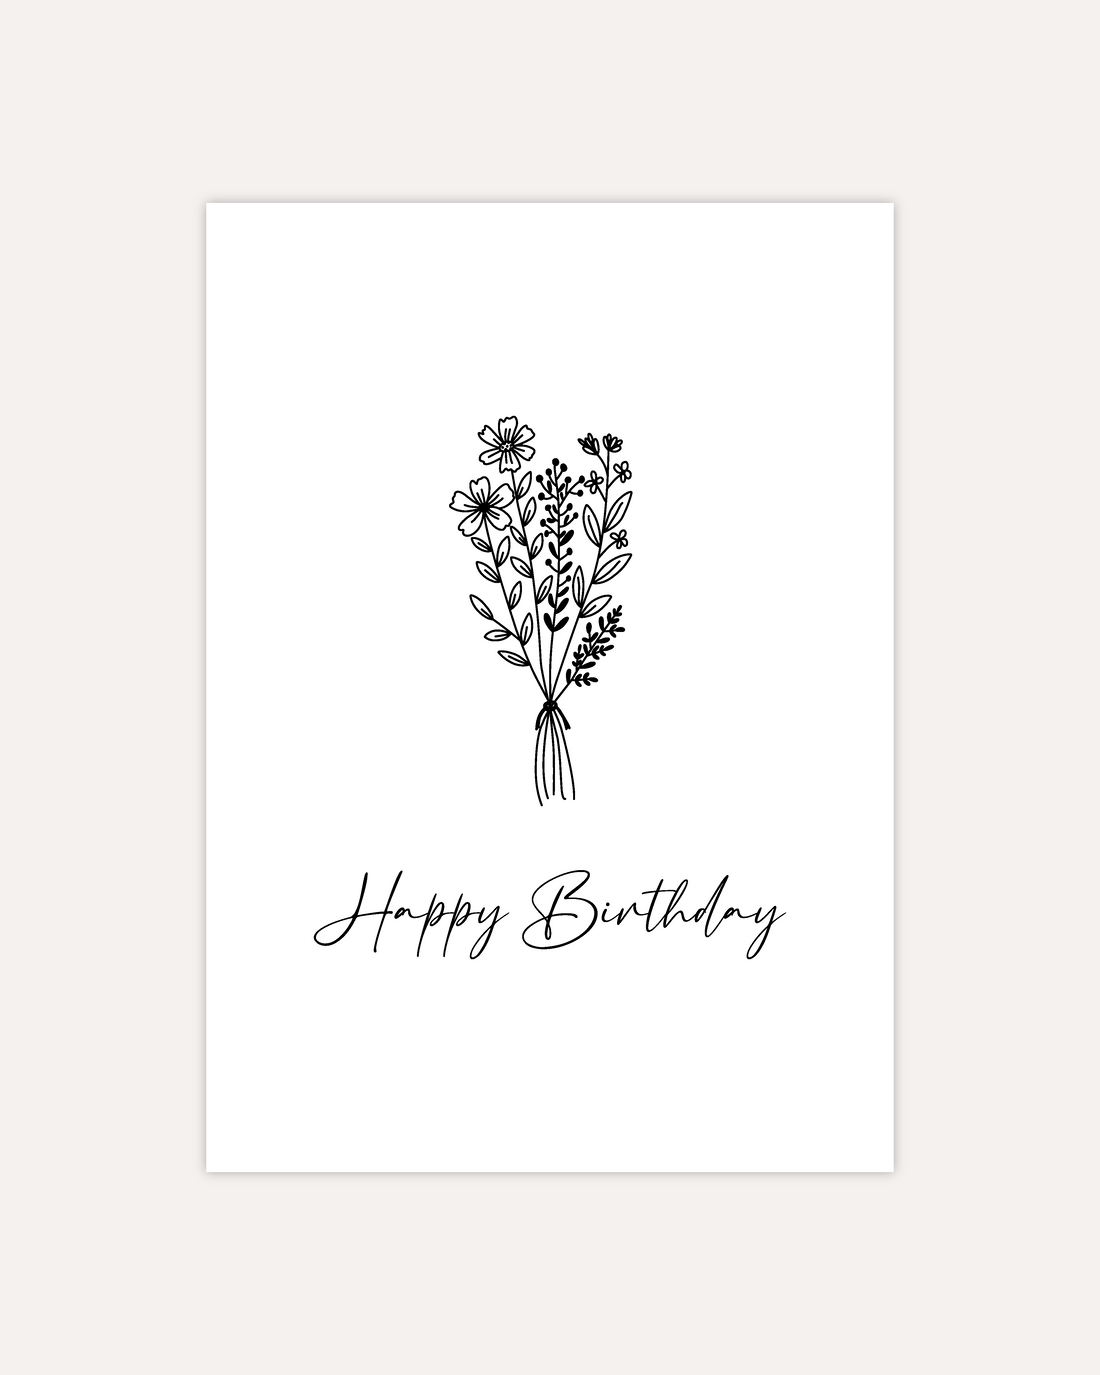 A postcard design showing a line art drawing of a bunch of flowers tied together. Below that is some cursive writing saying &quot;Happy Birthday&quot;. The design is shown on a beige background.